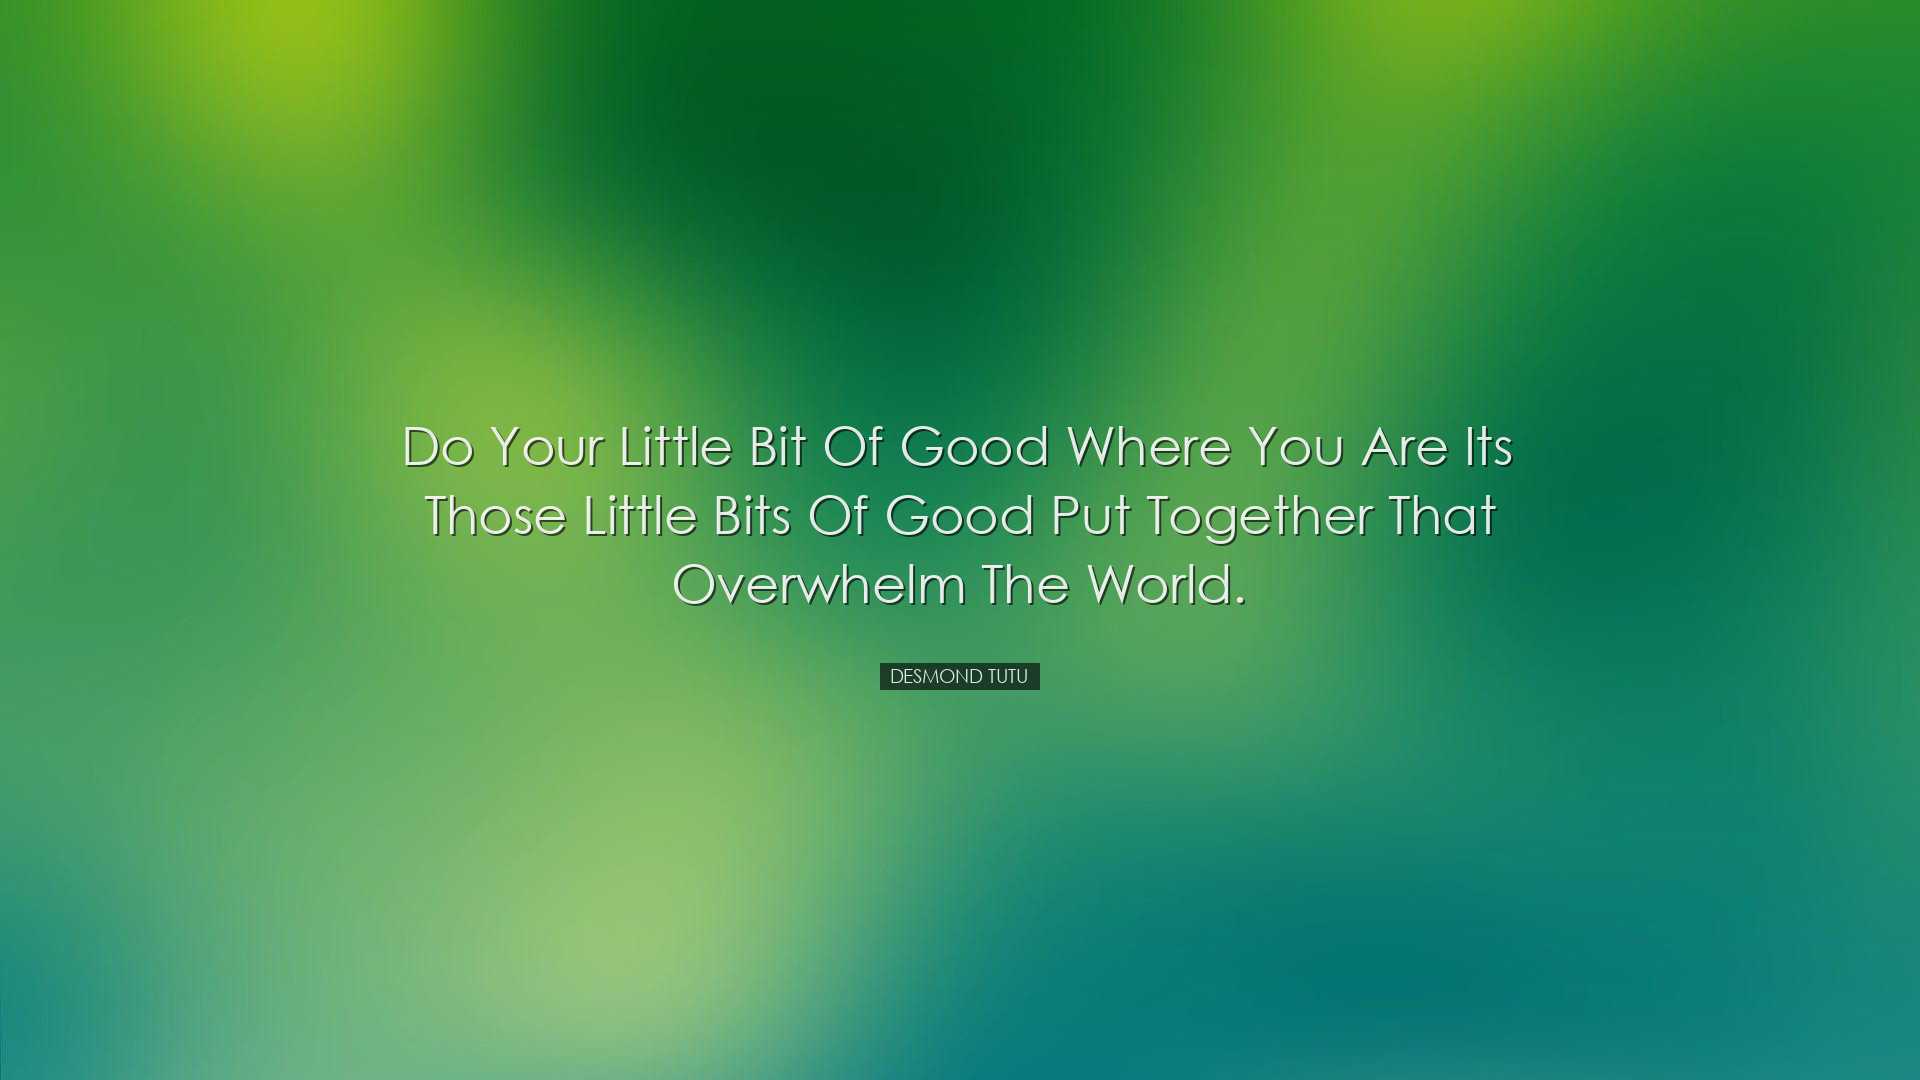 Do your little bit of good where you are its those little bits of